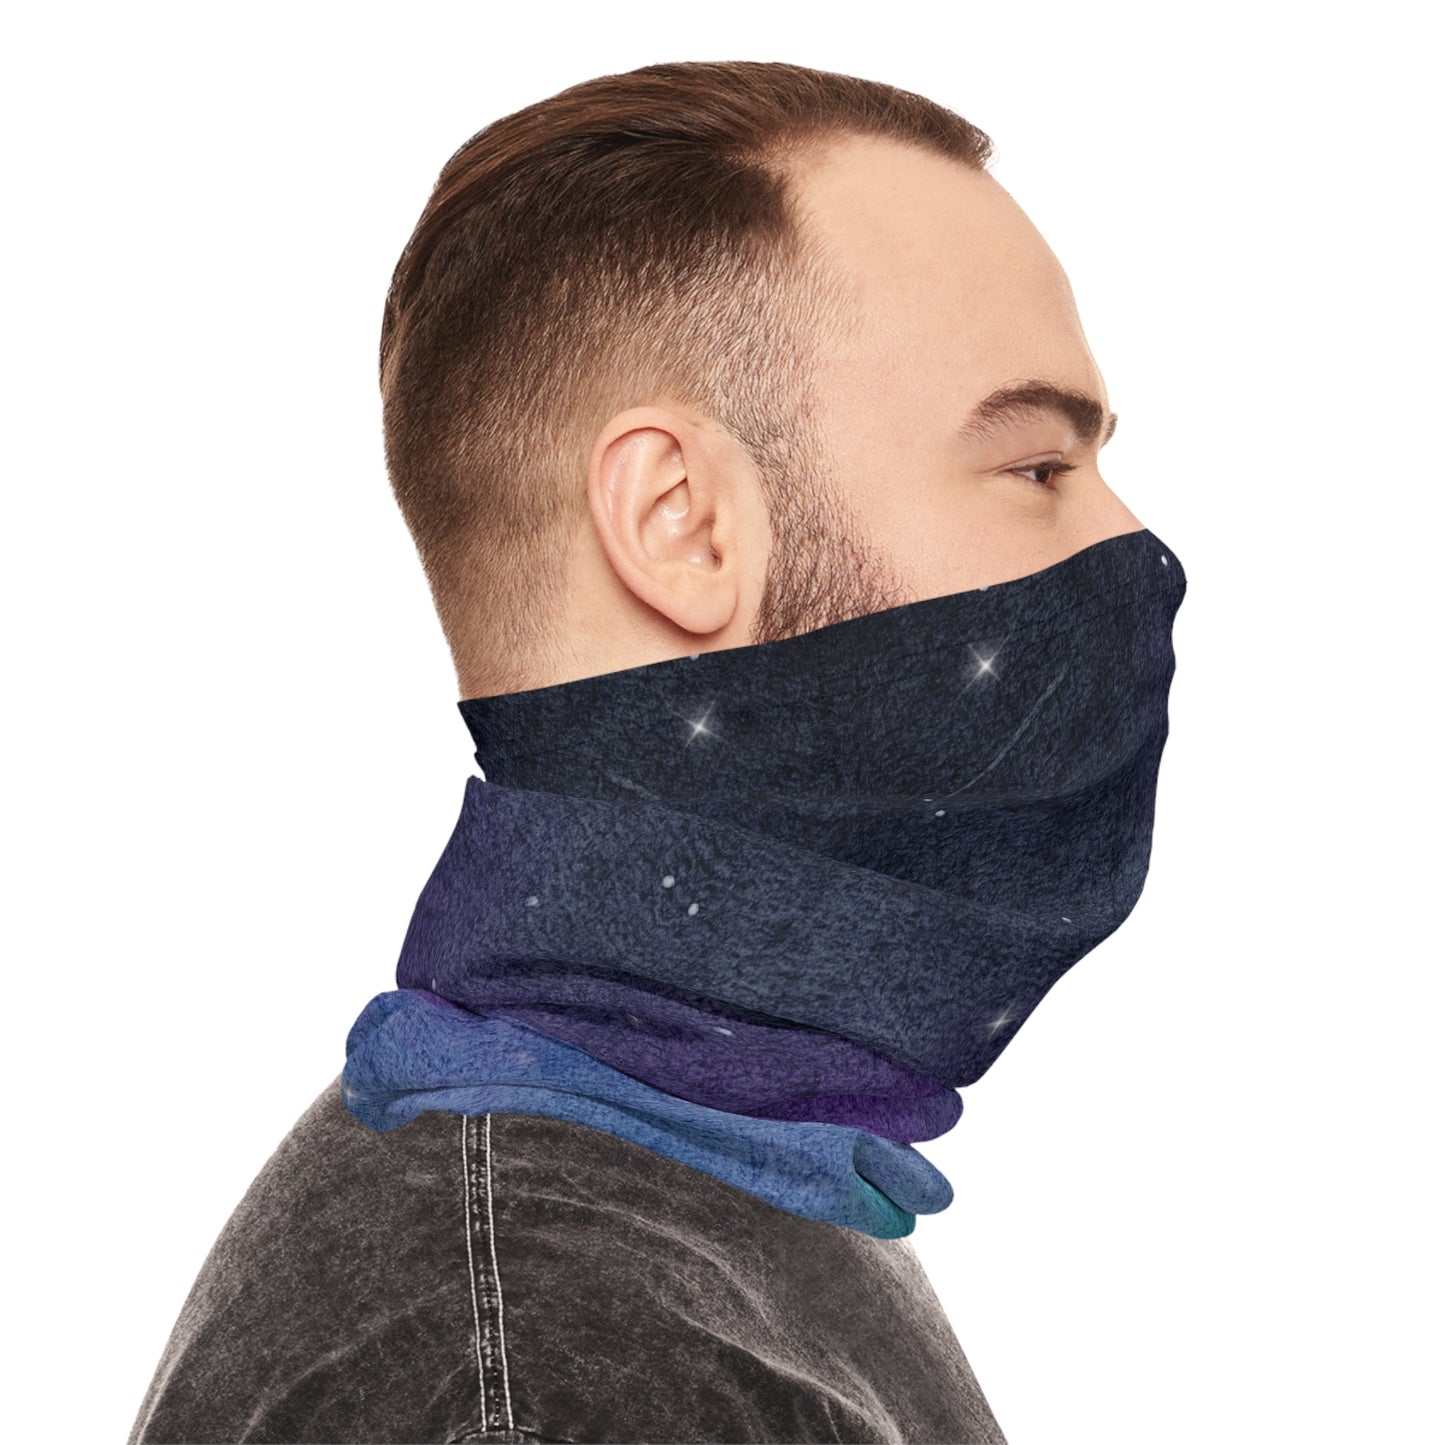 Stary Night Lightweight Neck Gaiter Makes An Excellent Gift for the Outdoor Enthuisiast